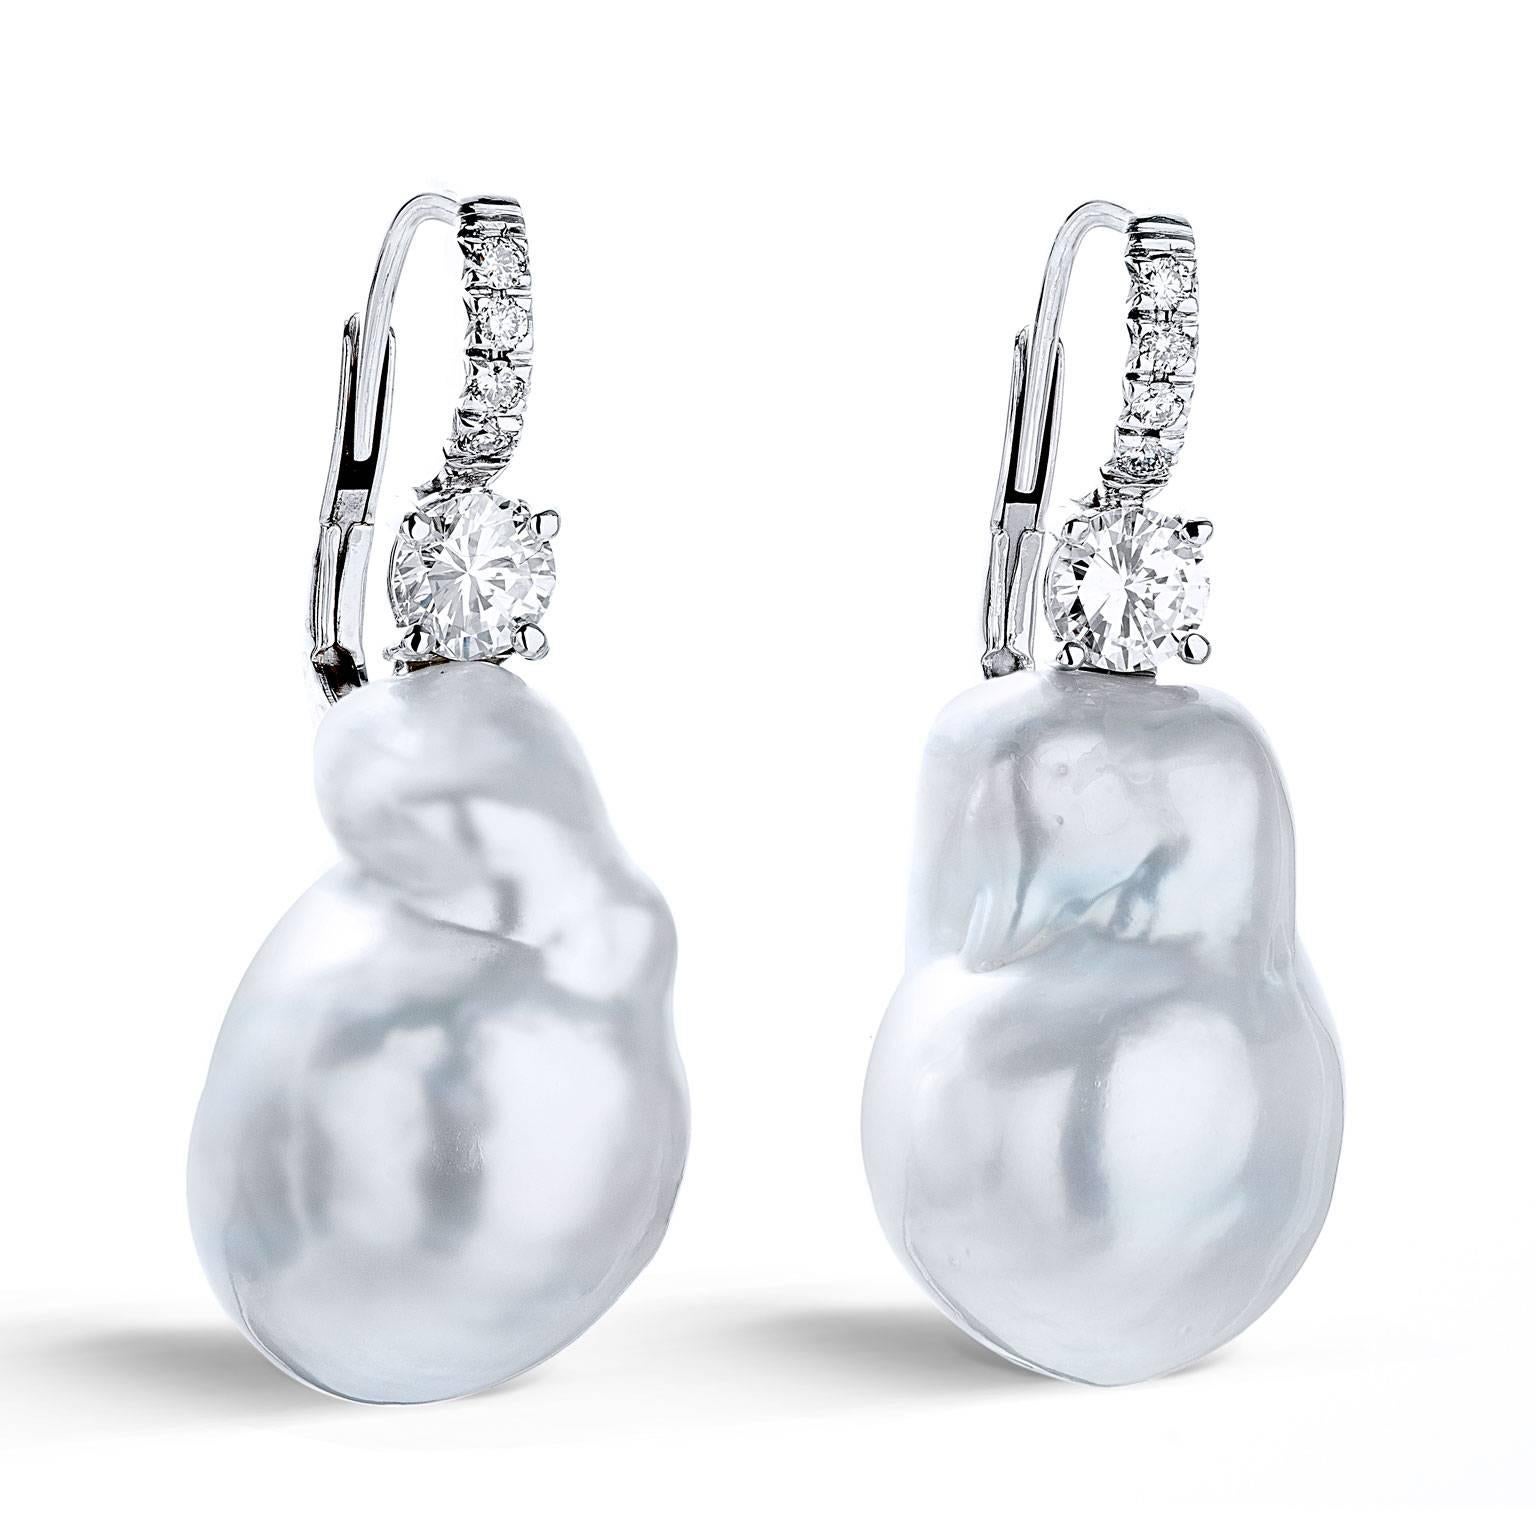 Natural Silver Baroque Pearl Earrings with Diamonds White Gold Lever Back

Earrings, featuring thirteen millimetre Baroque Silver Colored Pearls with a shimmering glow, topped by .67 carats of F/G VS Round Brilliant Cut Diamonds.

The 18 Karat White